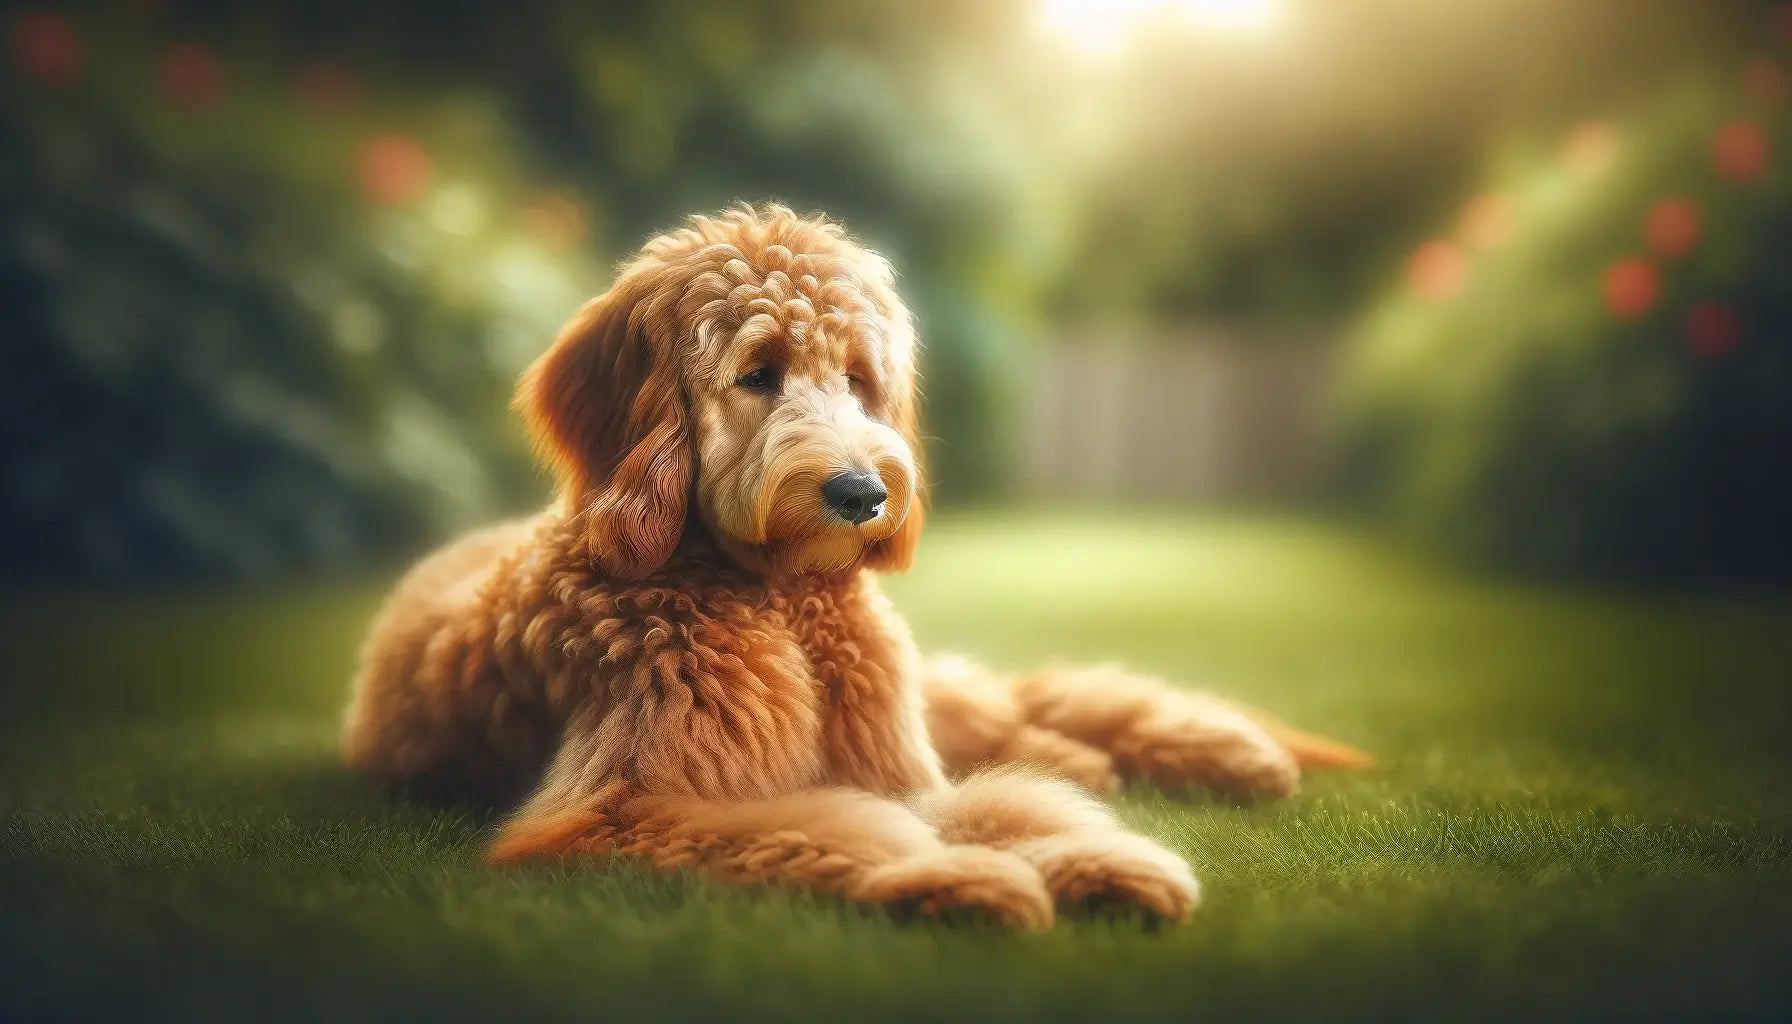 Red Goldendoodle relaxing on grass with a soft-focus background, suggesting a peaceful outdoor setting.